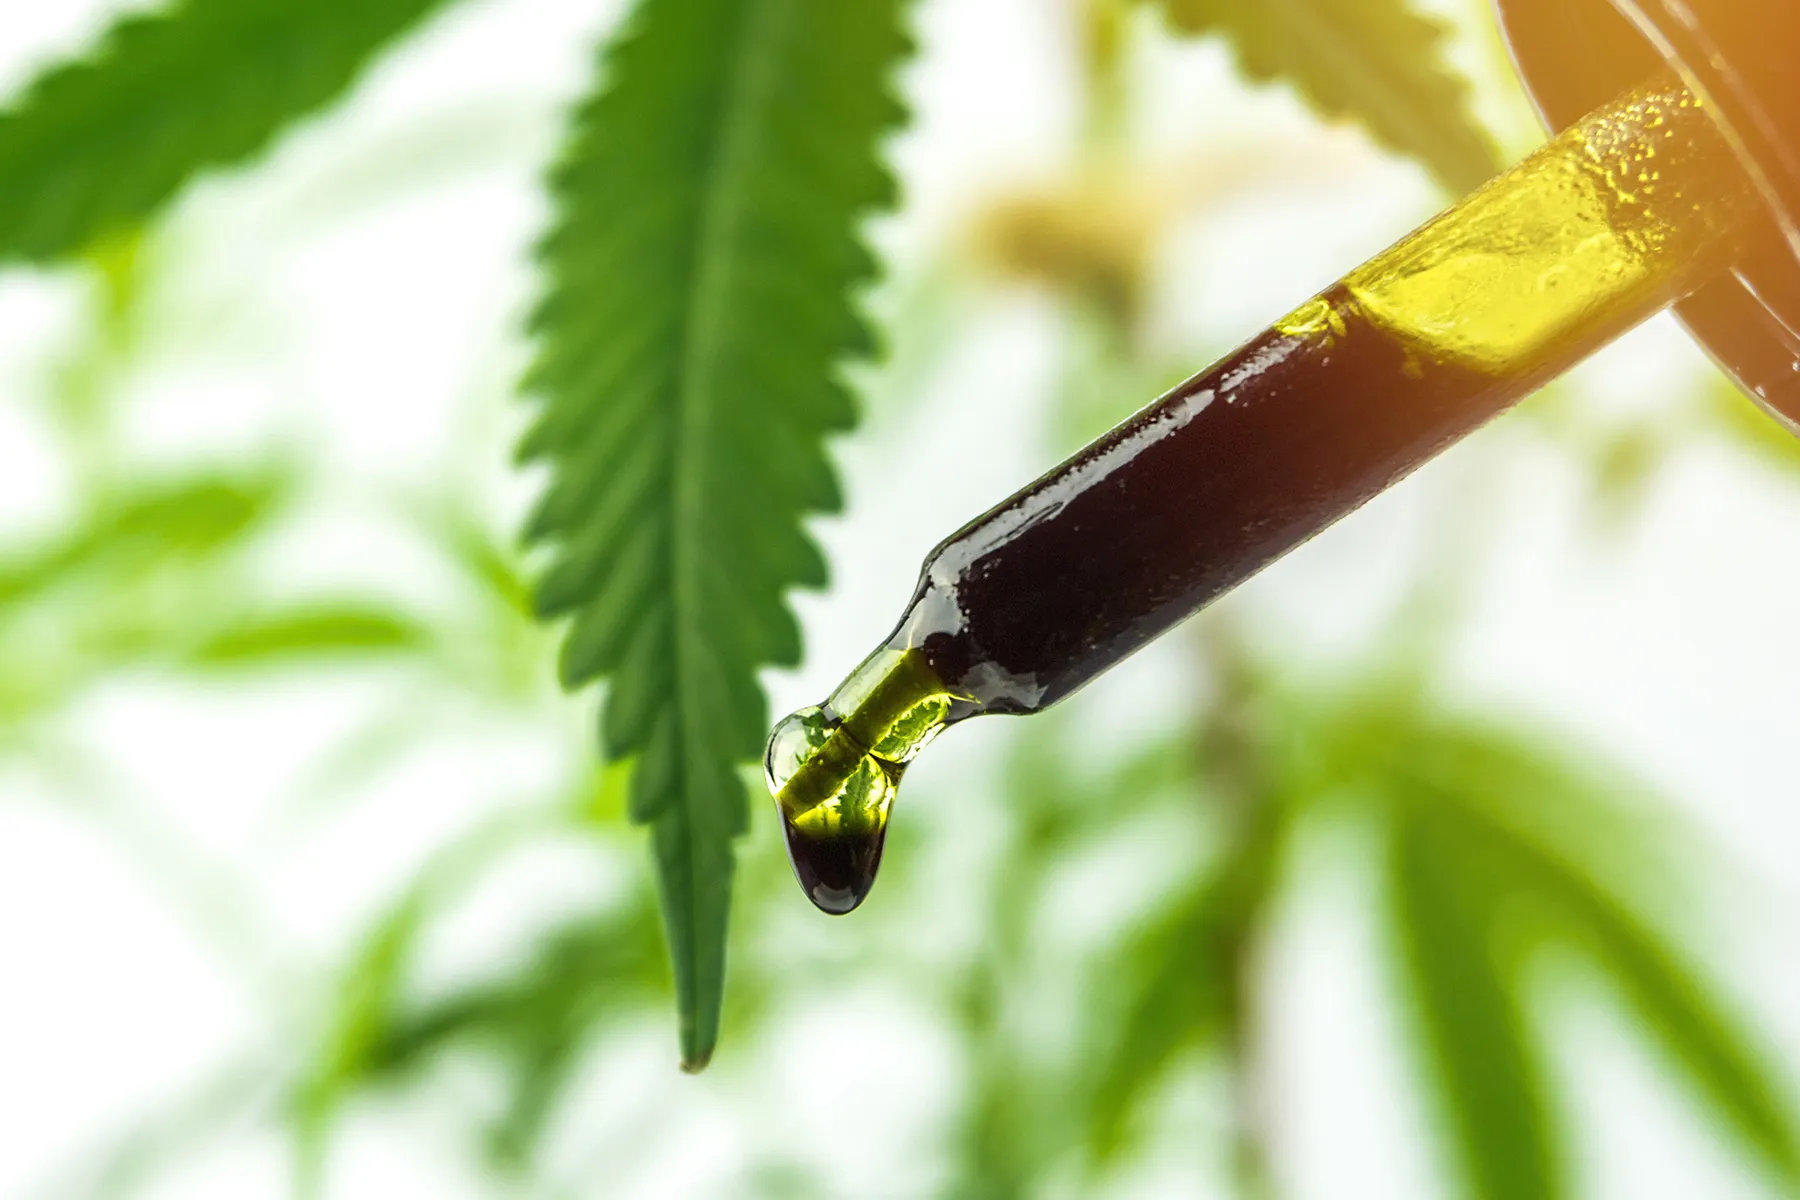 Some CBD Creams, Patches Don't Match Labels: Study